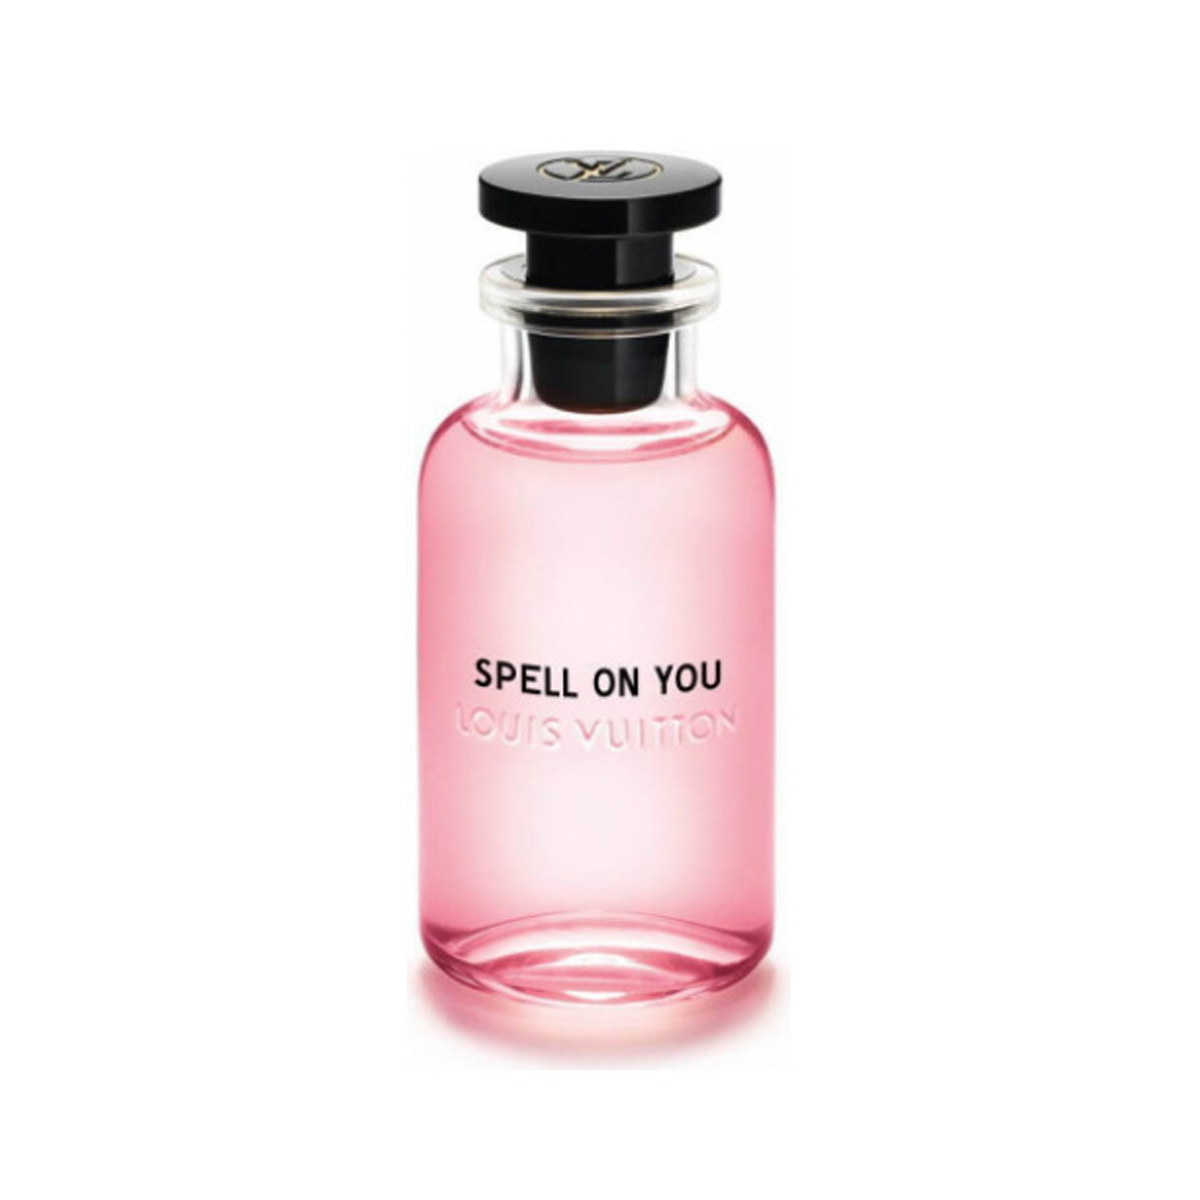 LOUIS VUITTON SPELL ON YOU EDP 100ML